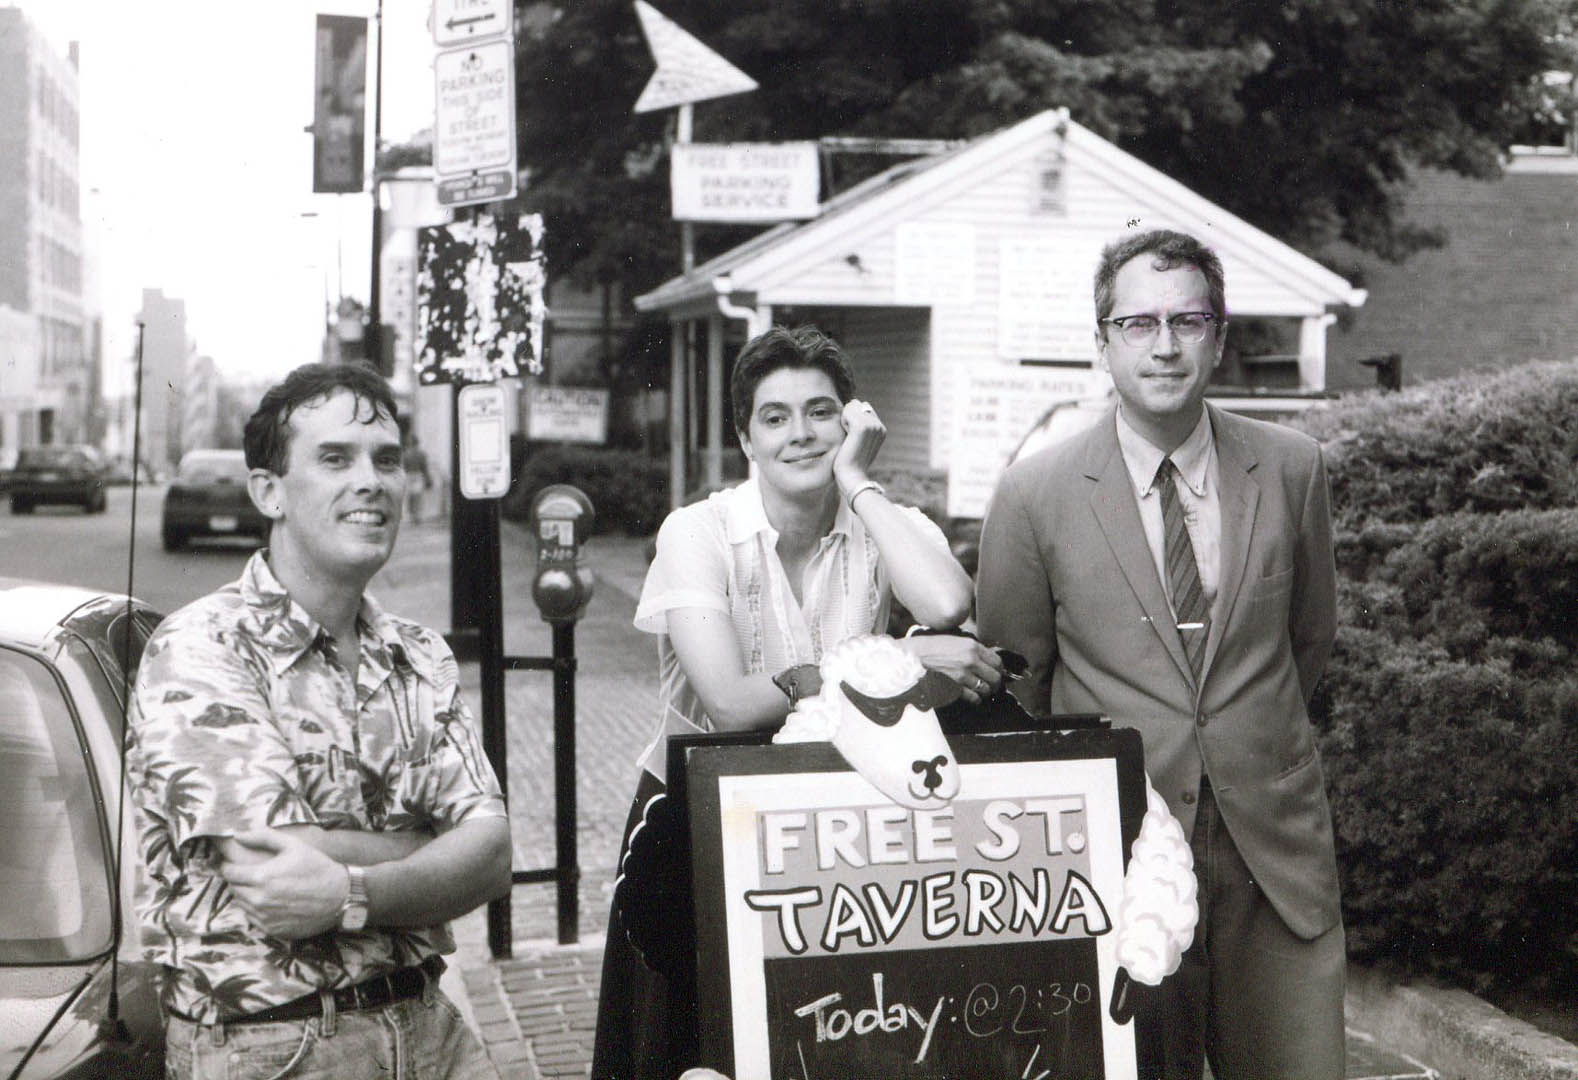 The Howling Turbines on a blistering hot day at the Free Street Taverna, Aug. 1, 1999: from left, drummer Ken Reynolds, bassist Gretchen Schaefer and me -- guitarist and singer Doug Hubley. Photo by Jeff Stanton.